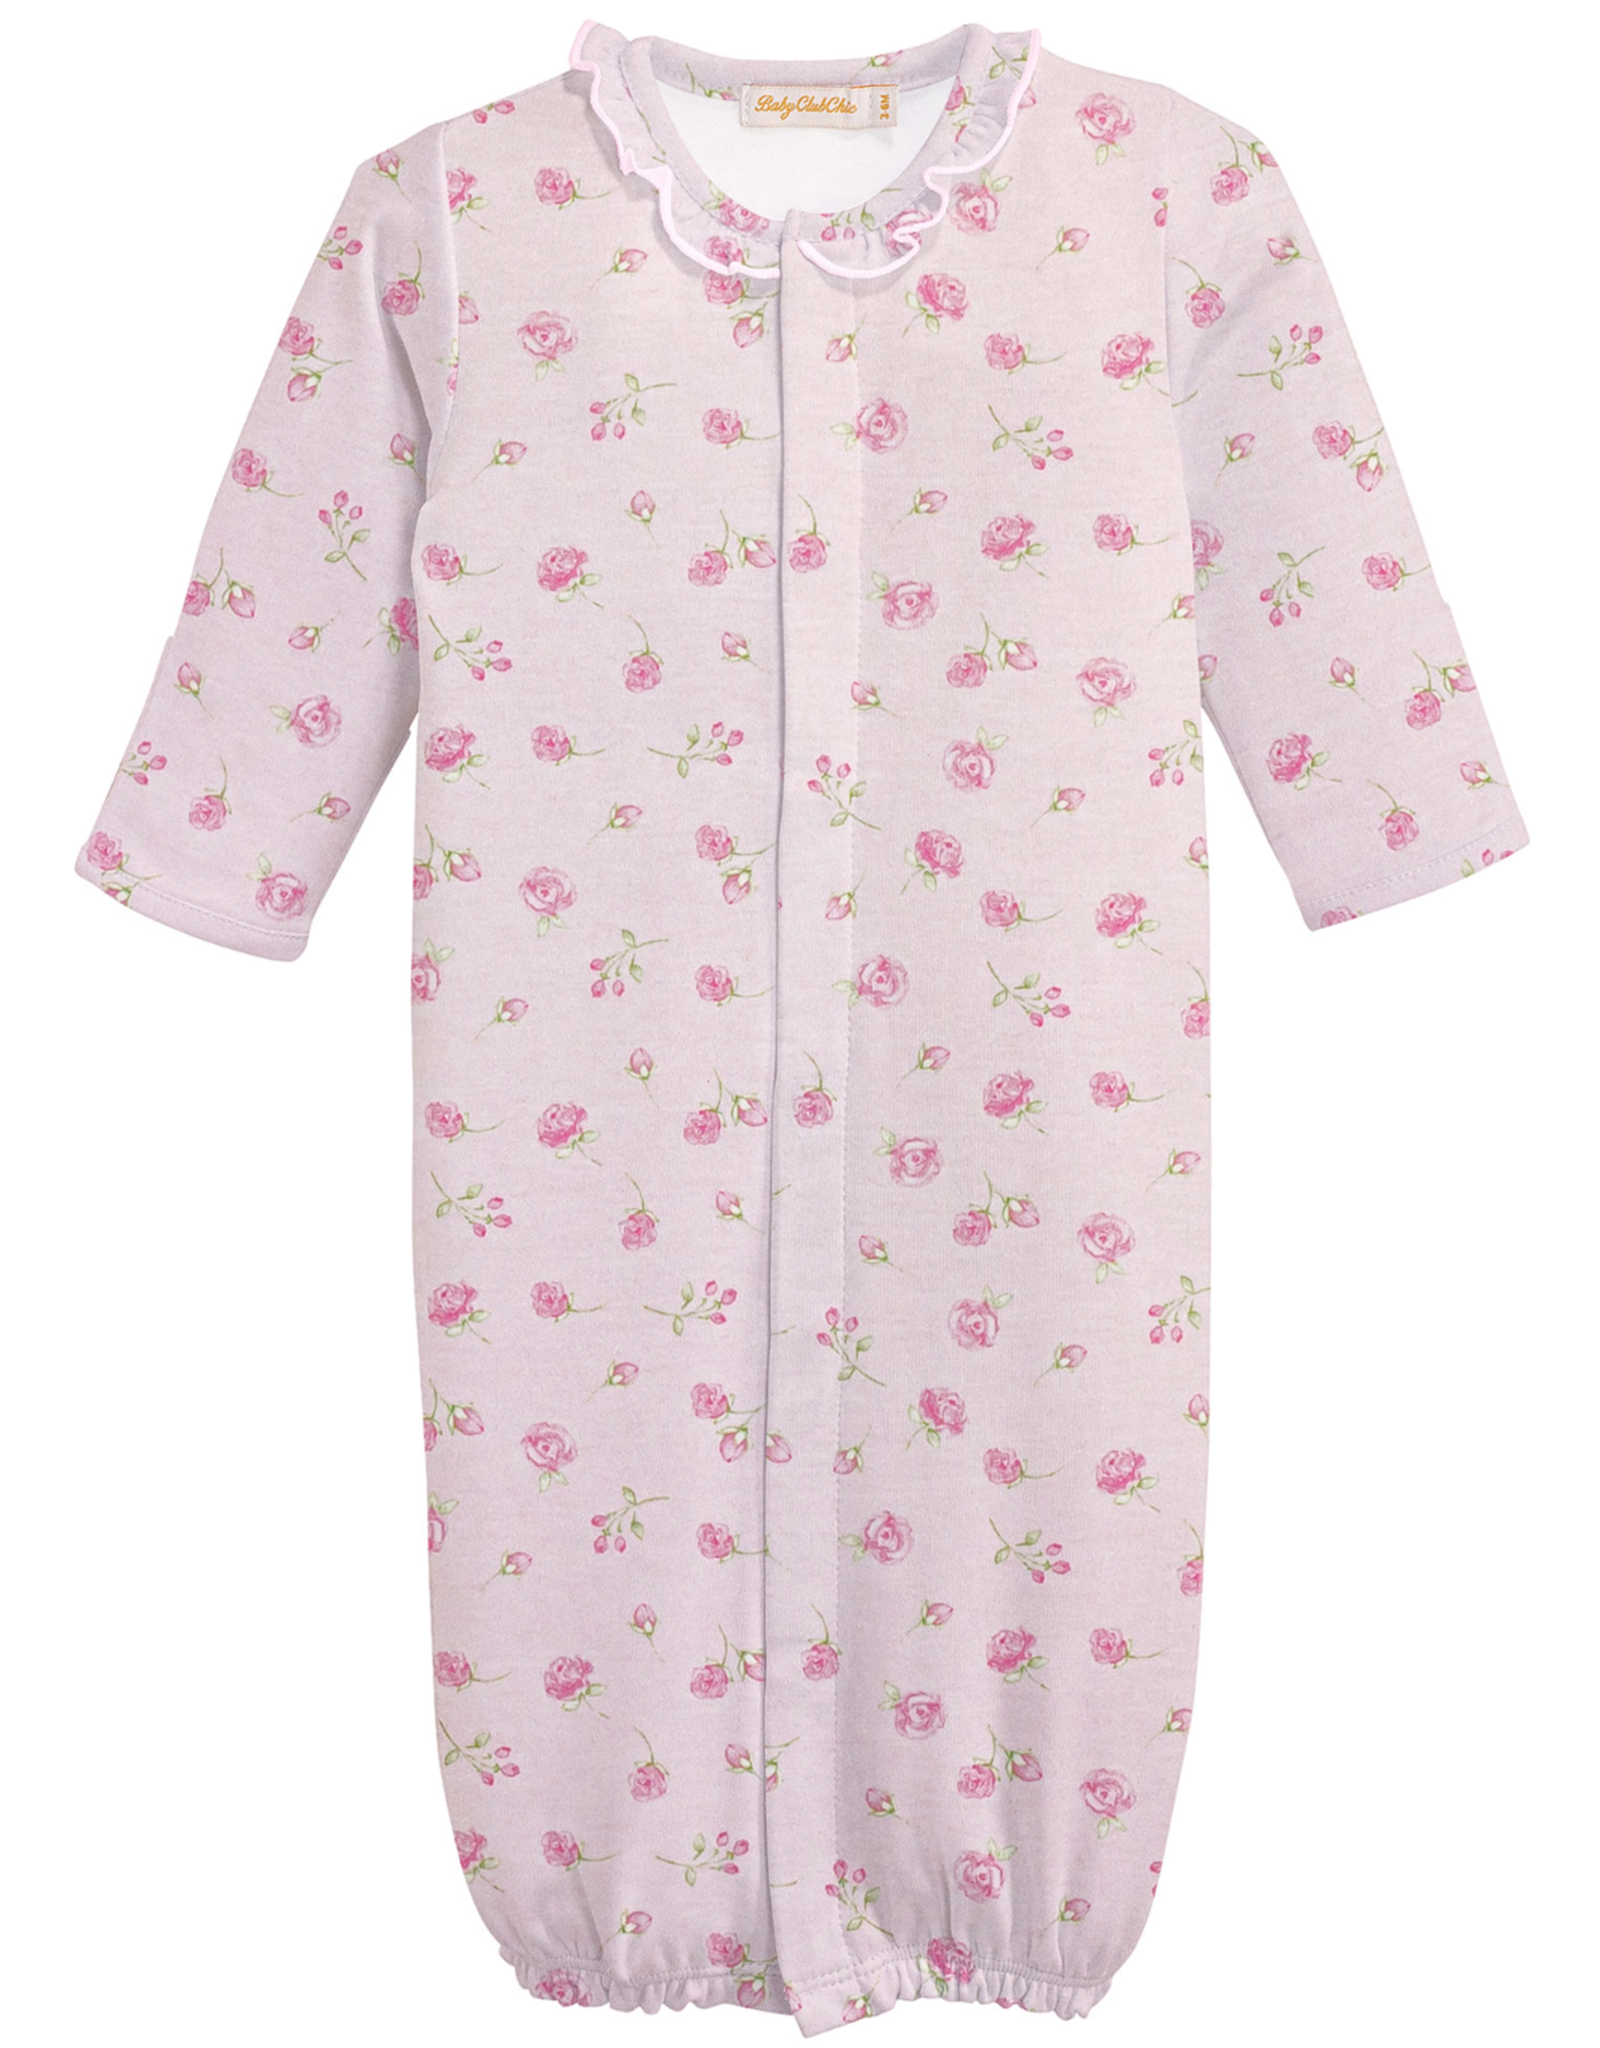 Baby Club Chic BCCS24 Rosebuds Converter Gown